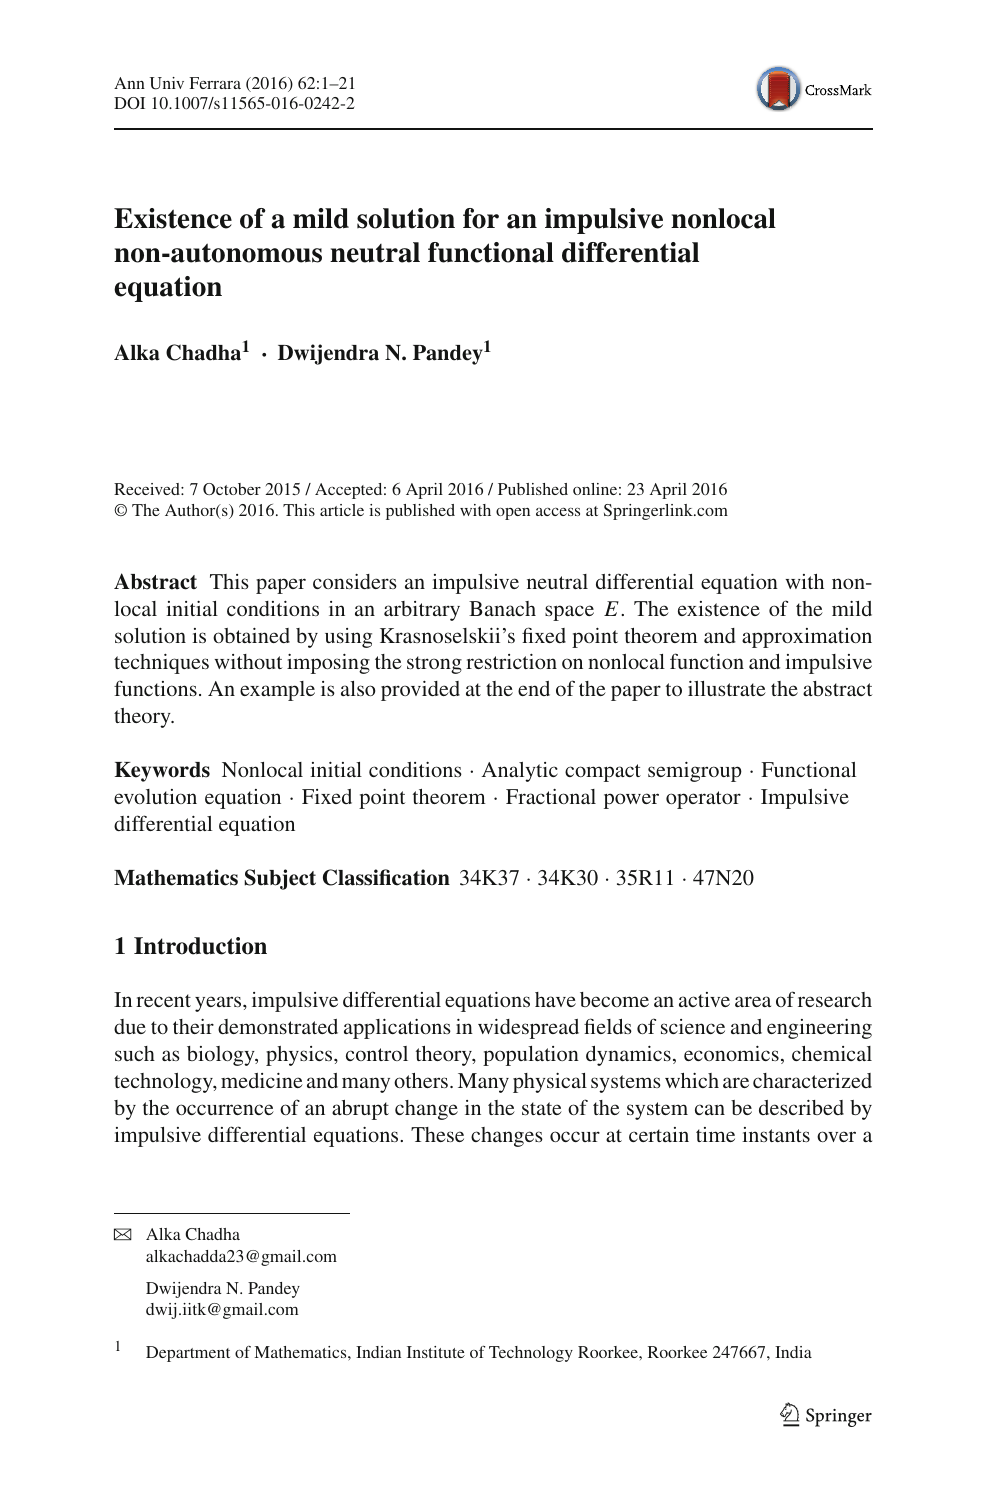 Existence Of A Mild Solution For An Impulsive Nonlocal Non Autonomous Neutral Functional Differential Equation Topic Of Research Paper In Mathematics Download Scholarly Article Pdf And Read For Free On Cyberleninka Open